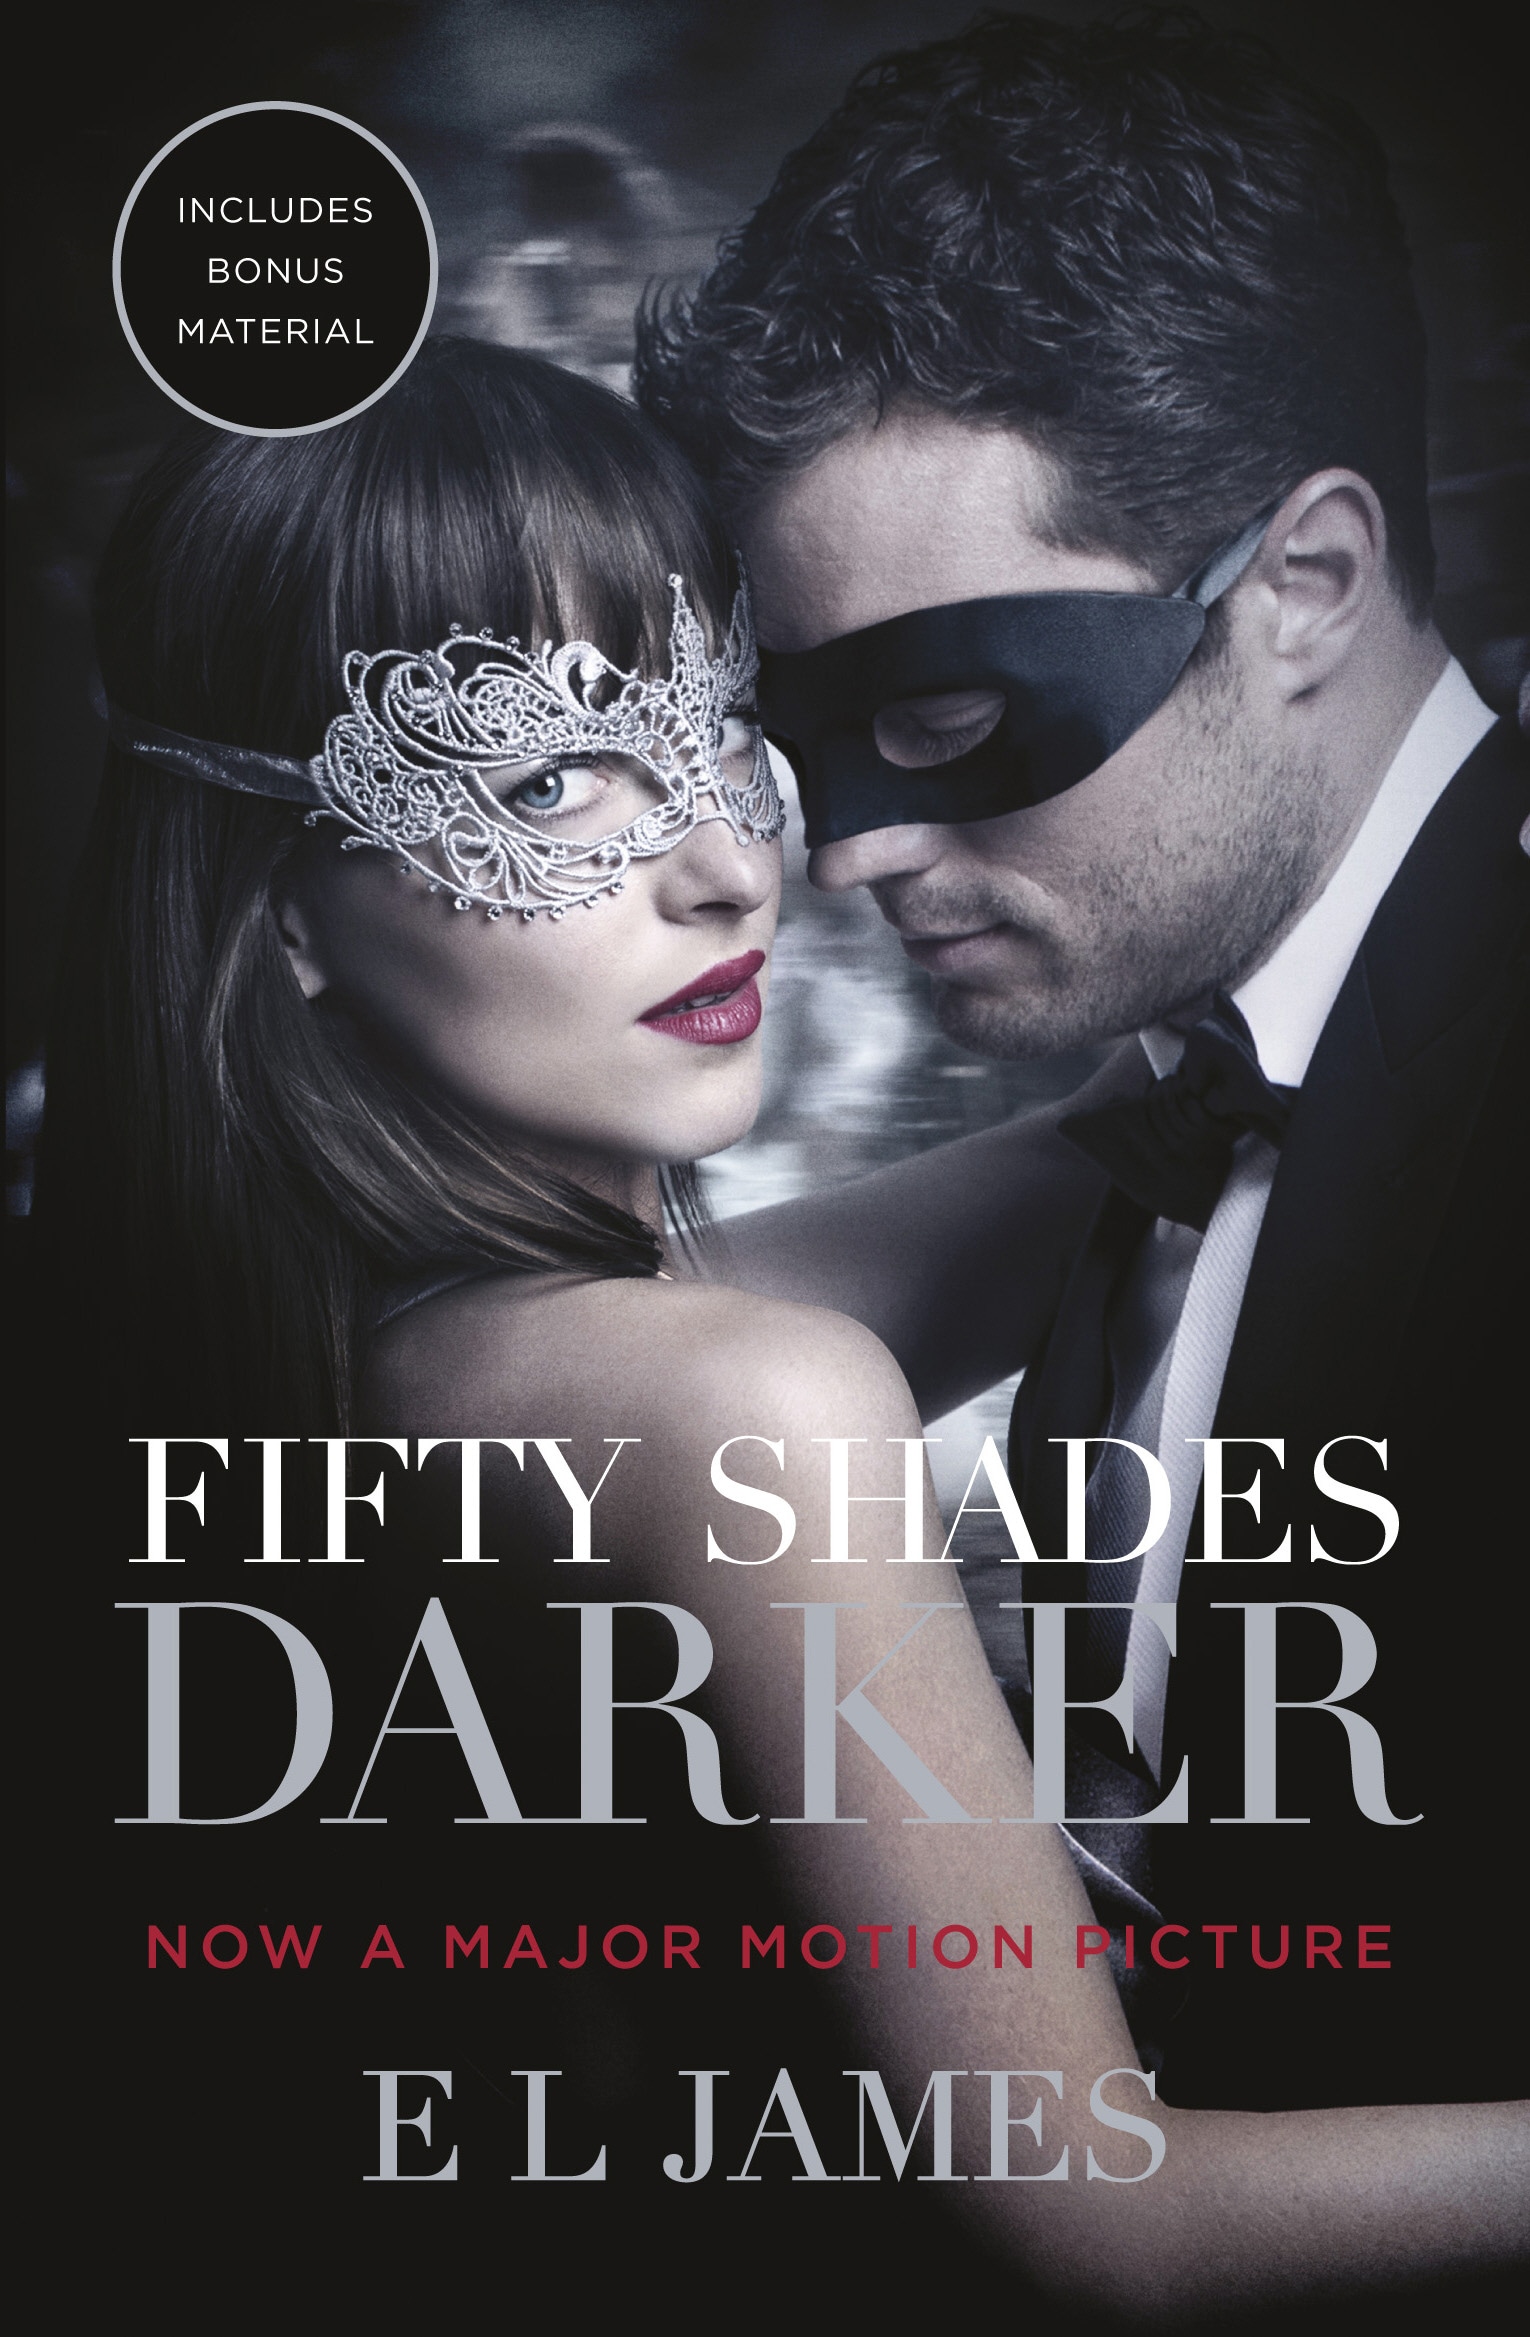 Book “Fifty Shades Darker” by E L James — January 3, 2017